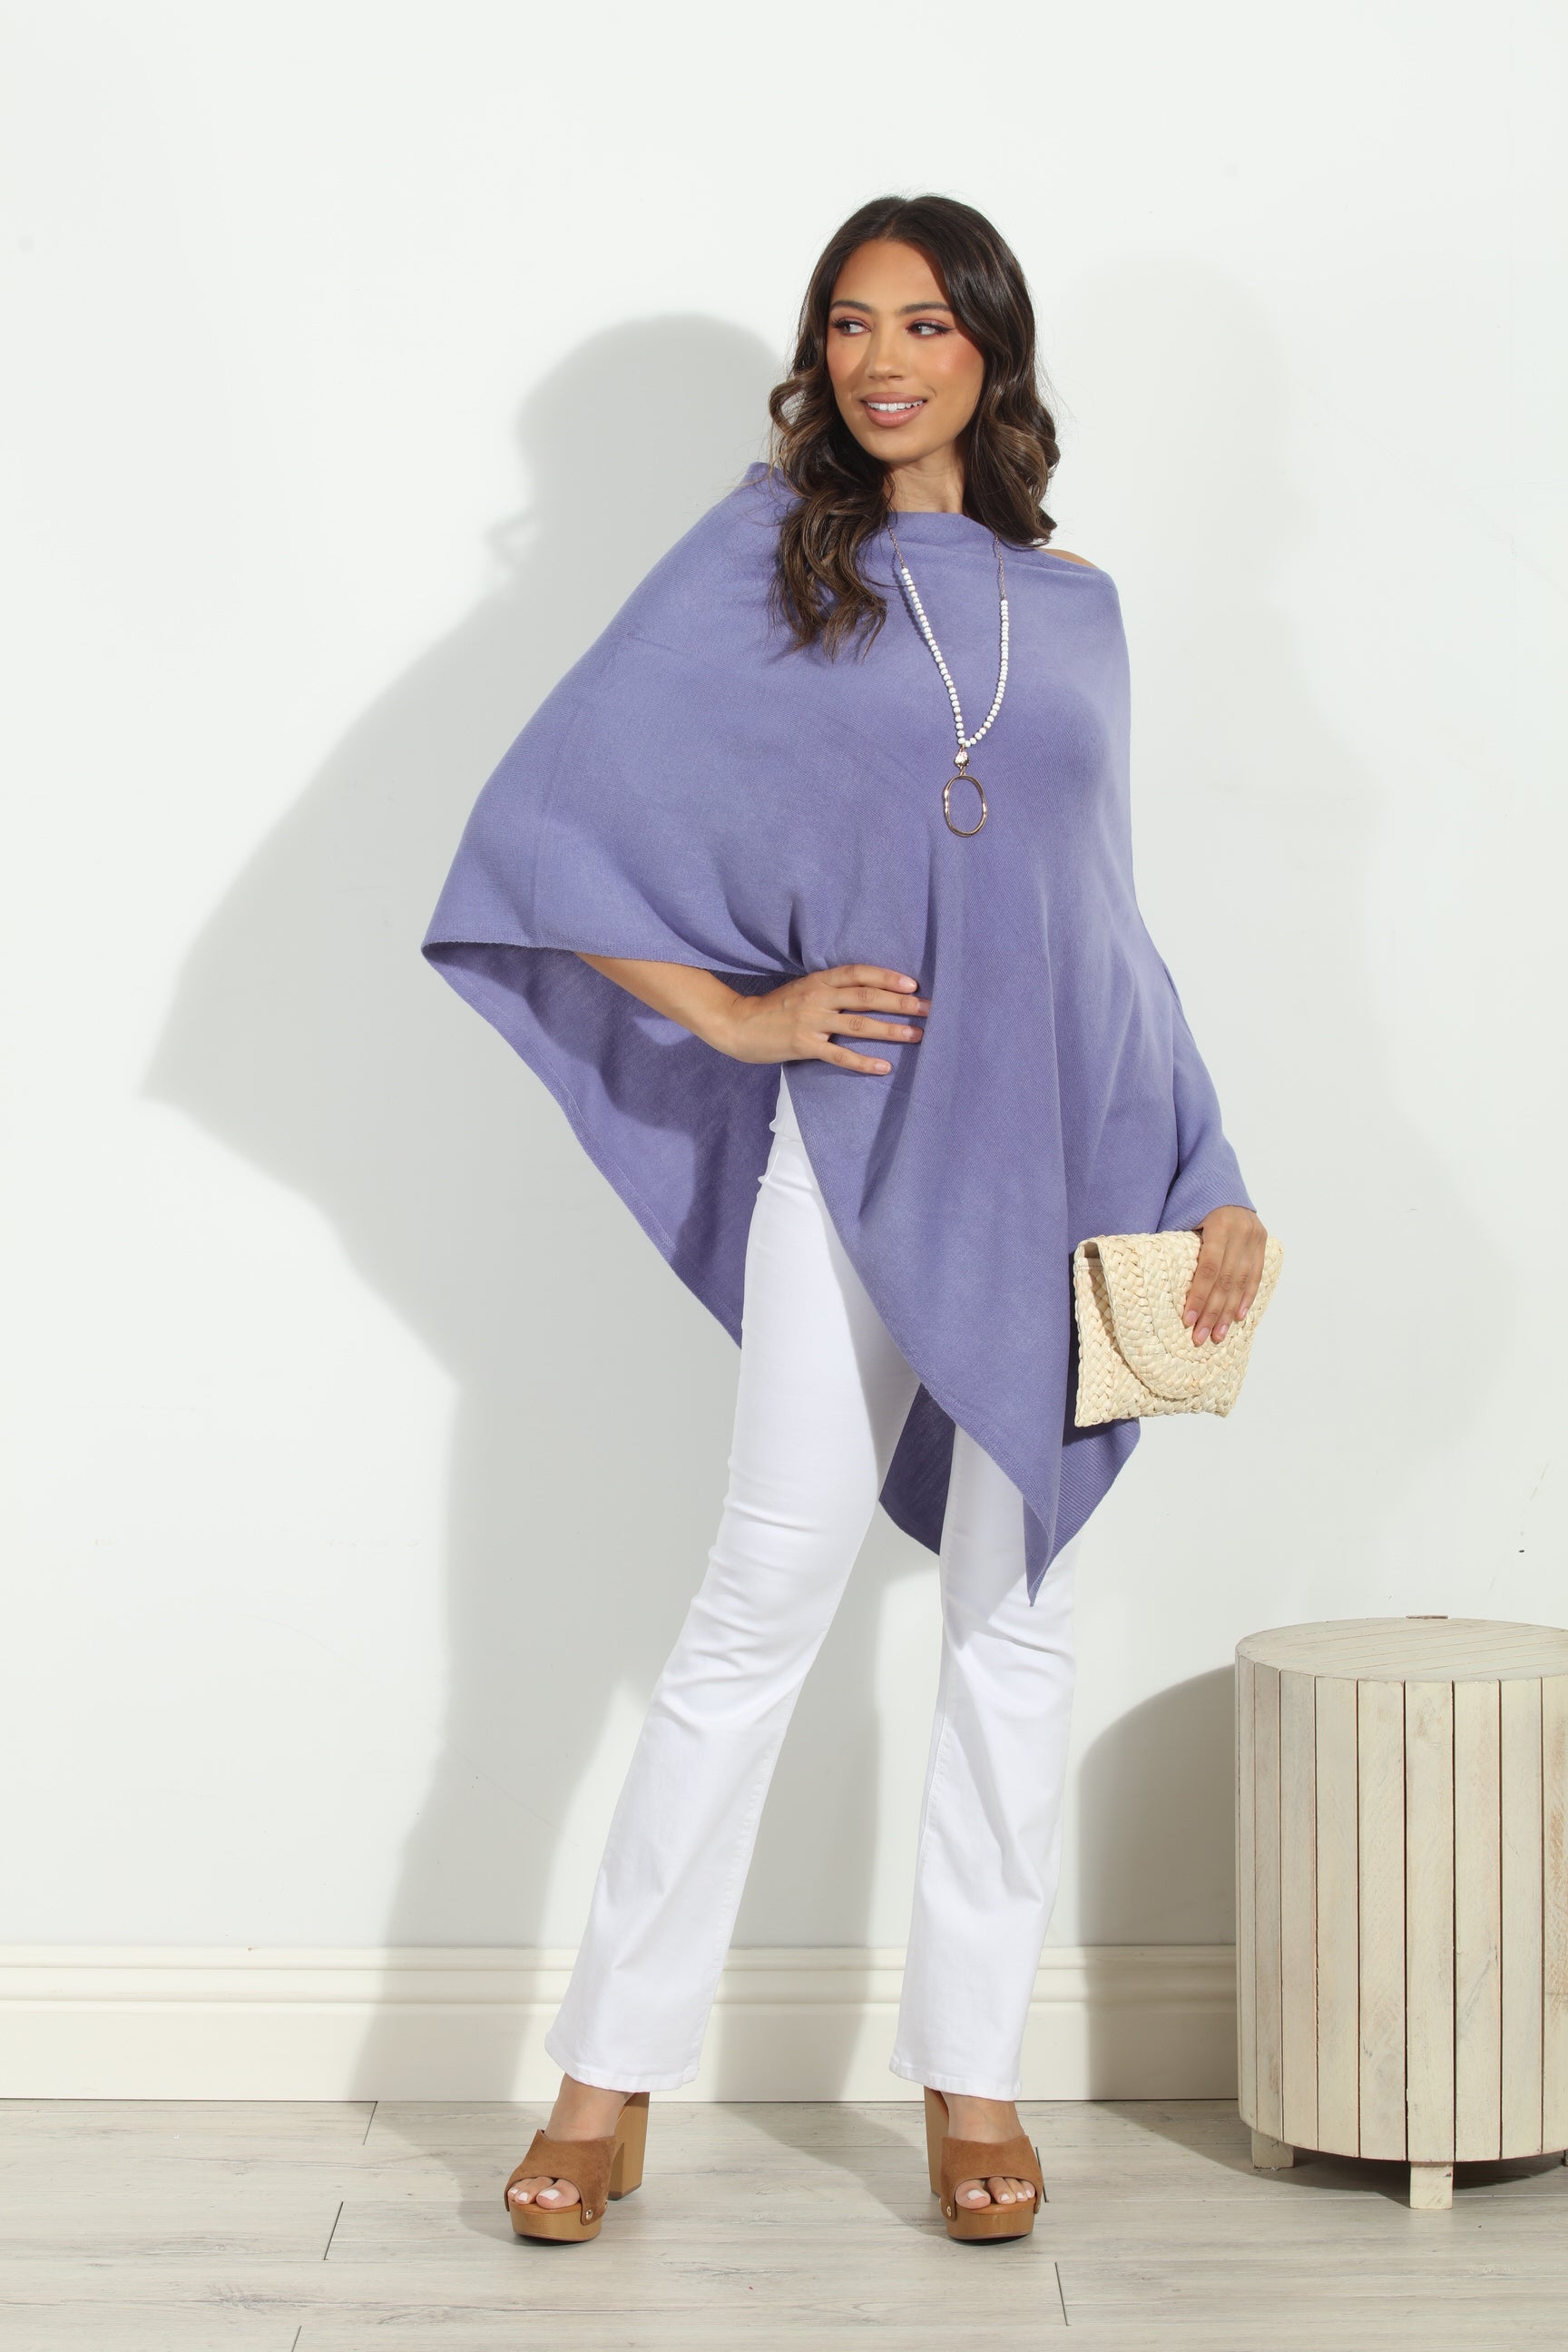 Periwinkle Throw-On Poncho- NEW COLOR